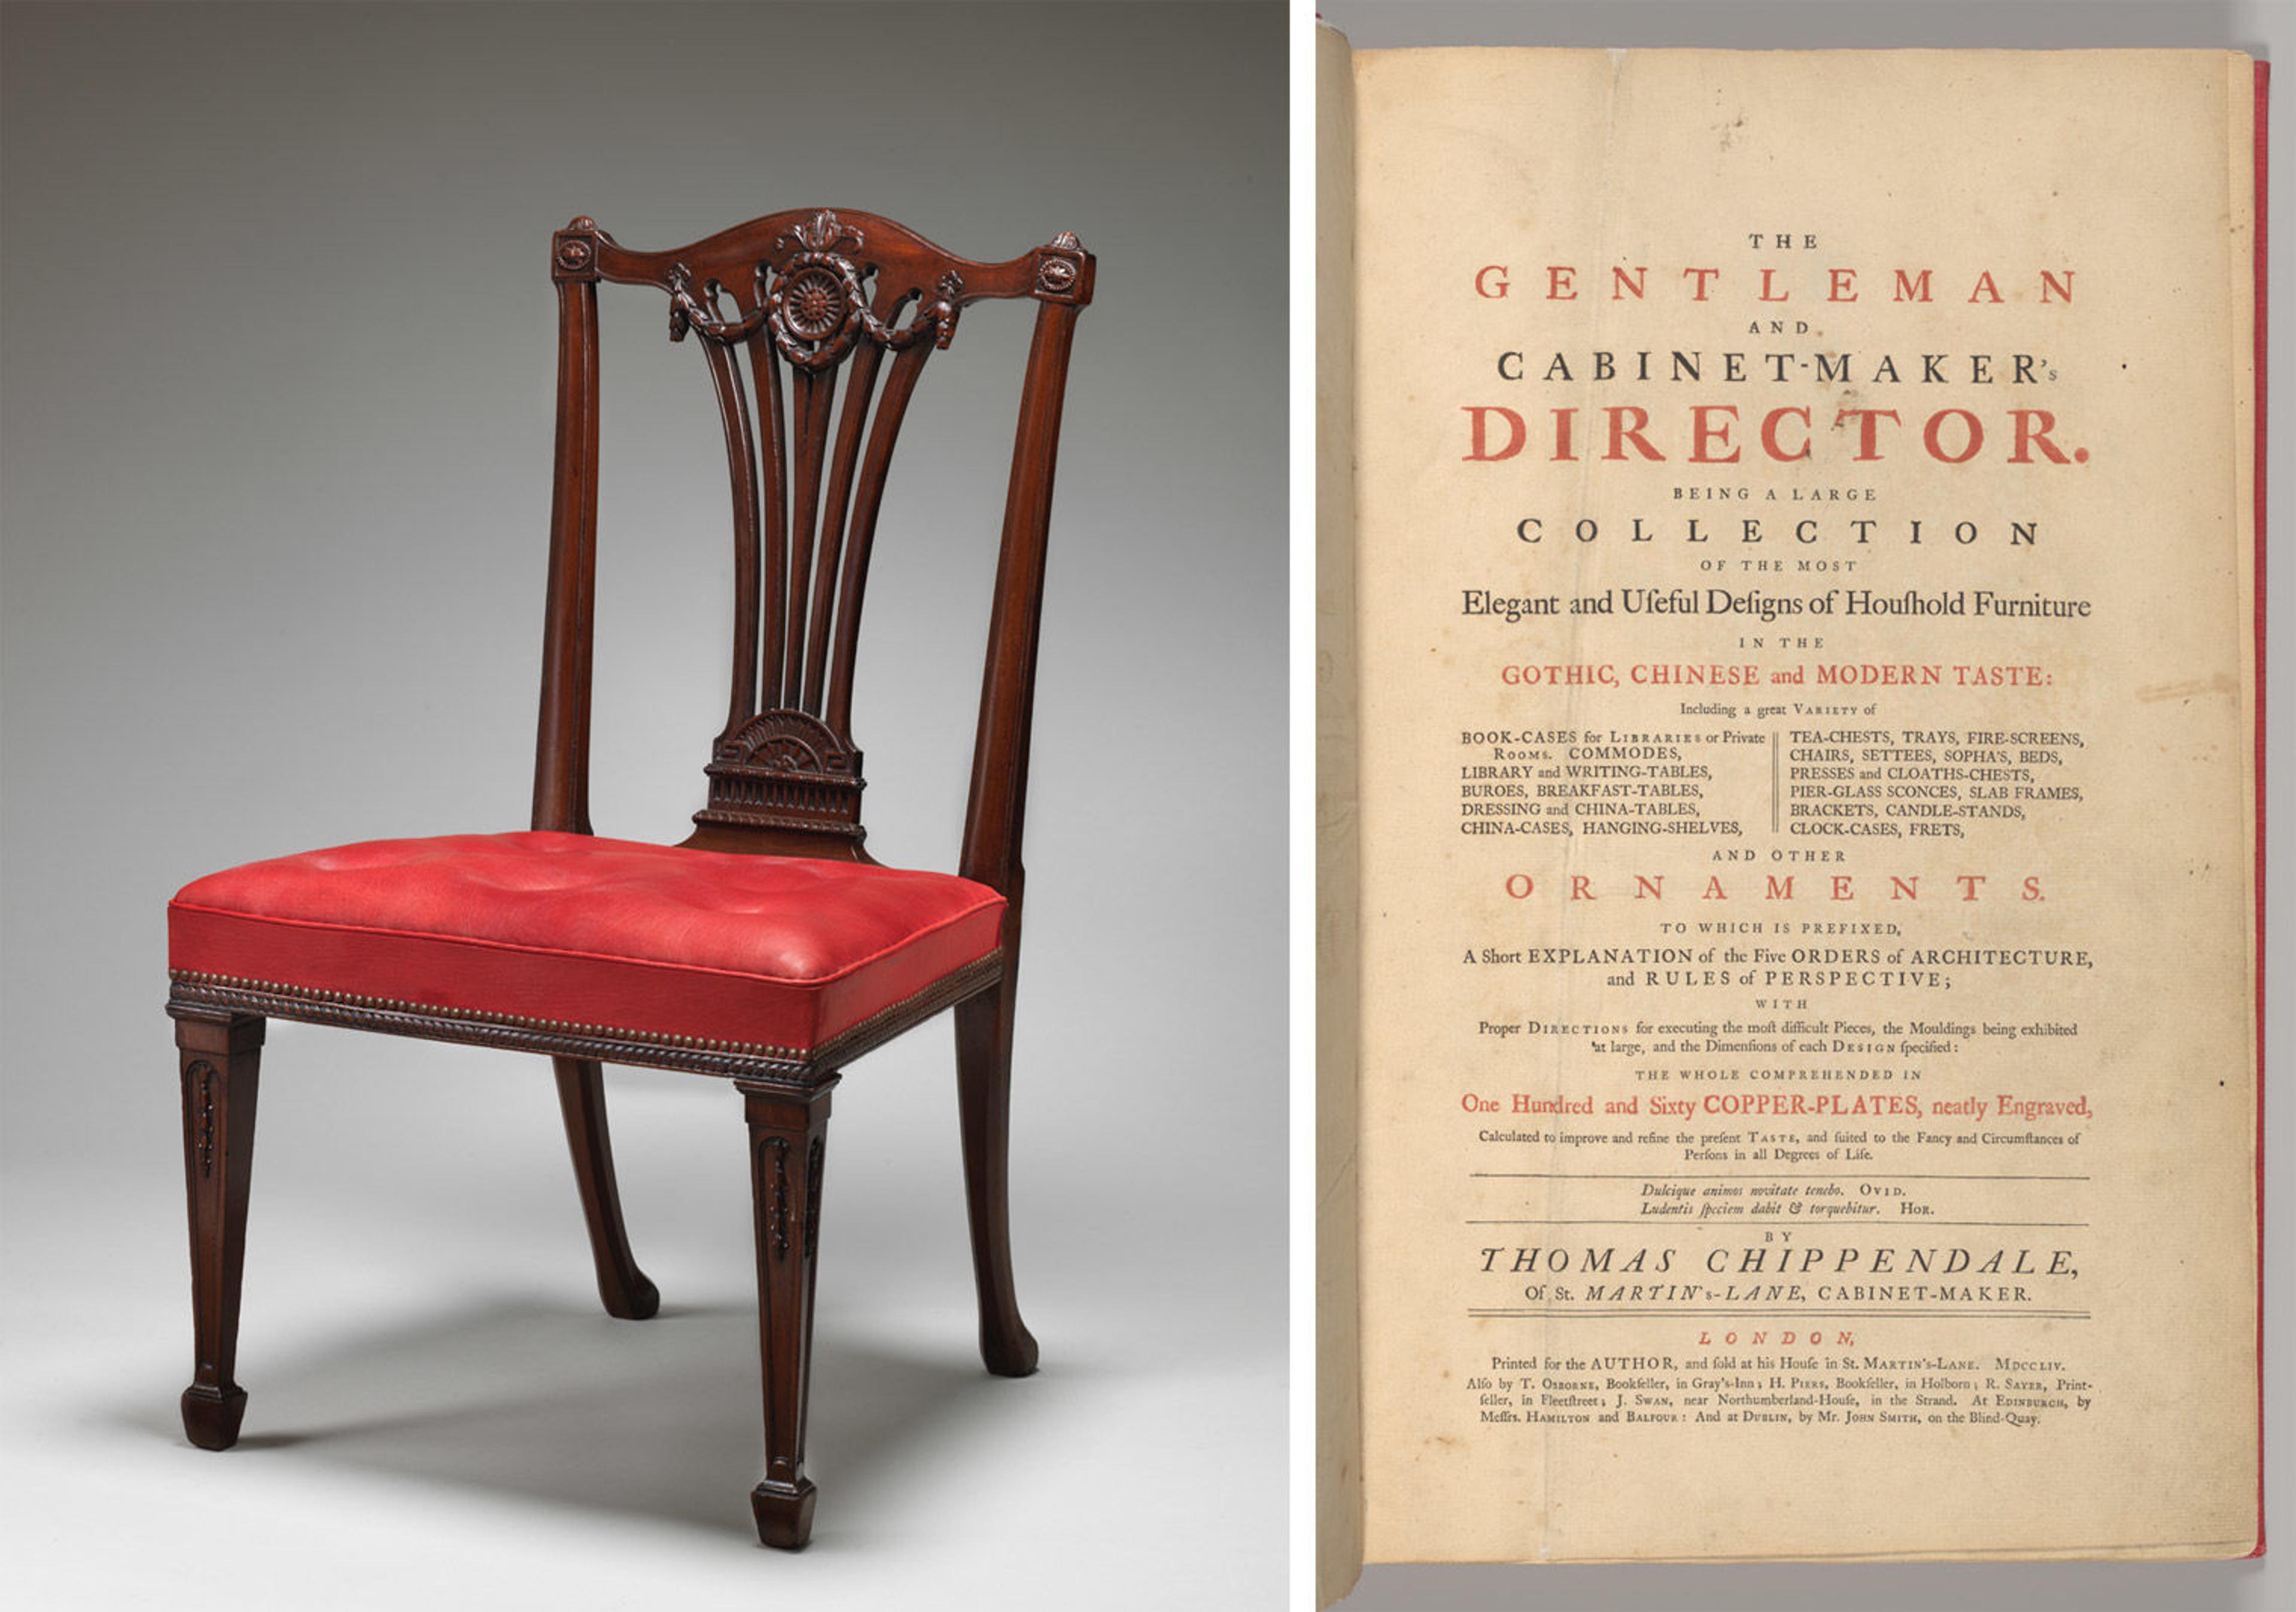 At left, an upholstered side chair by Thomas Chippendale. At right, the front page of Thomas Chippendale's "The Gentleman and Cabinet-Maker's Director"